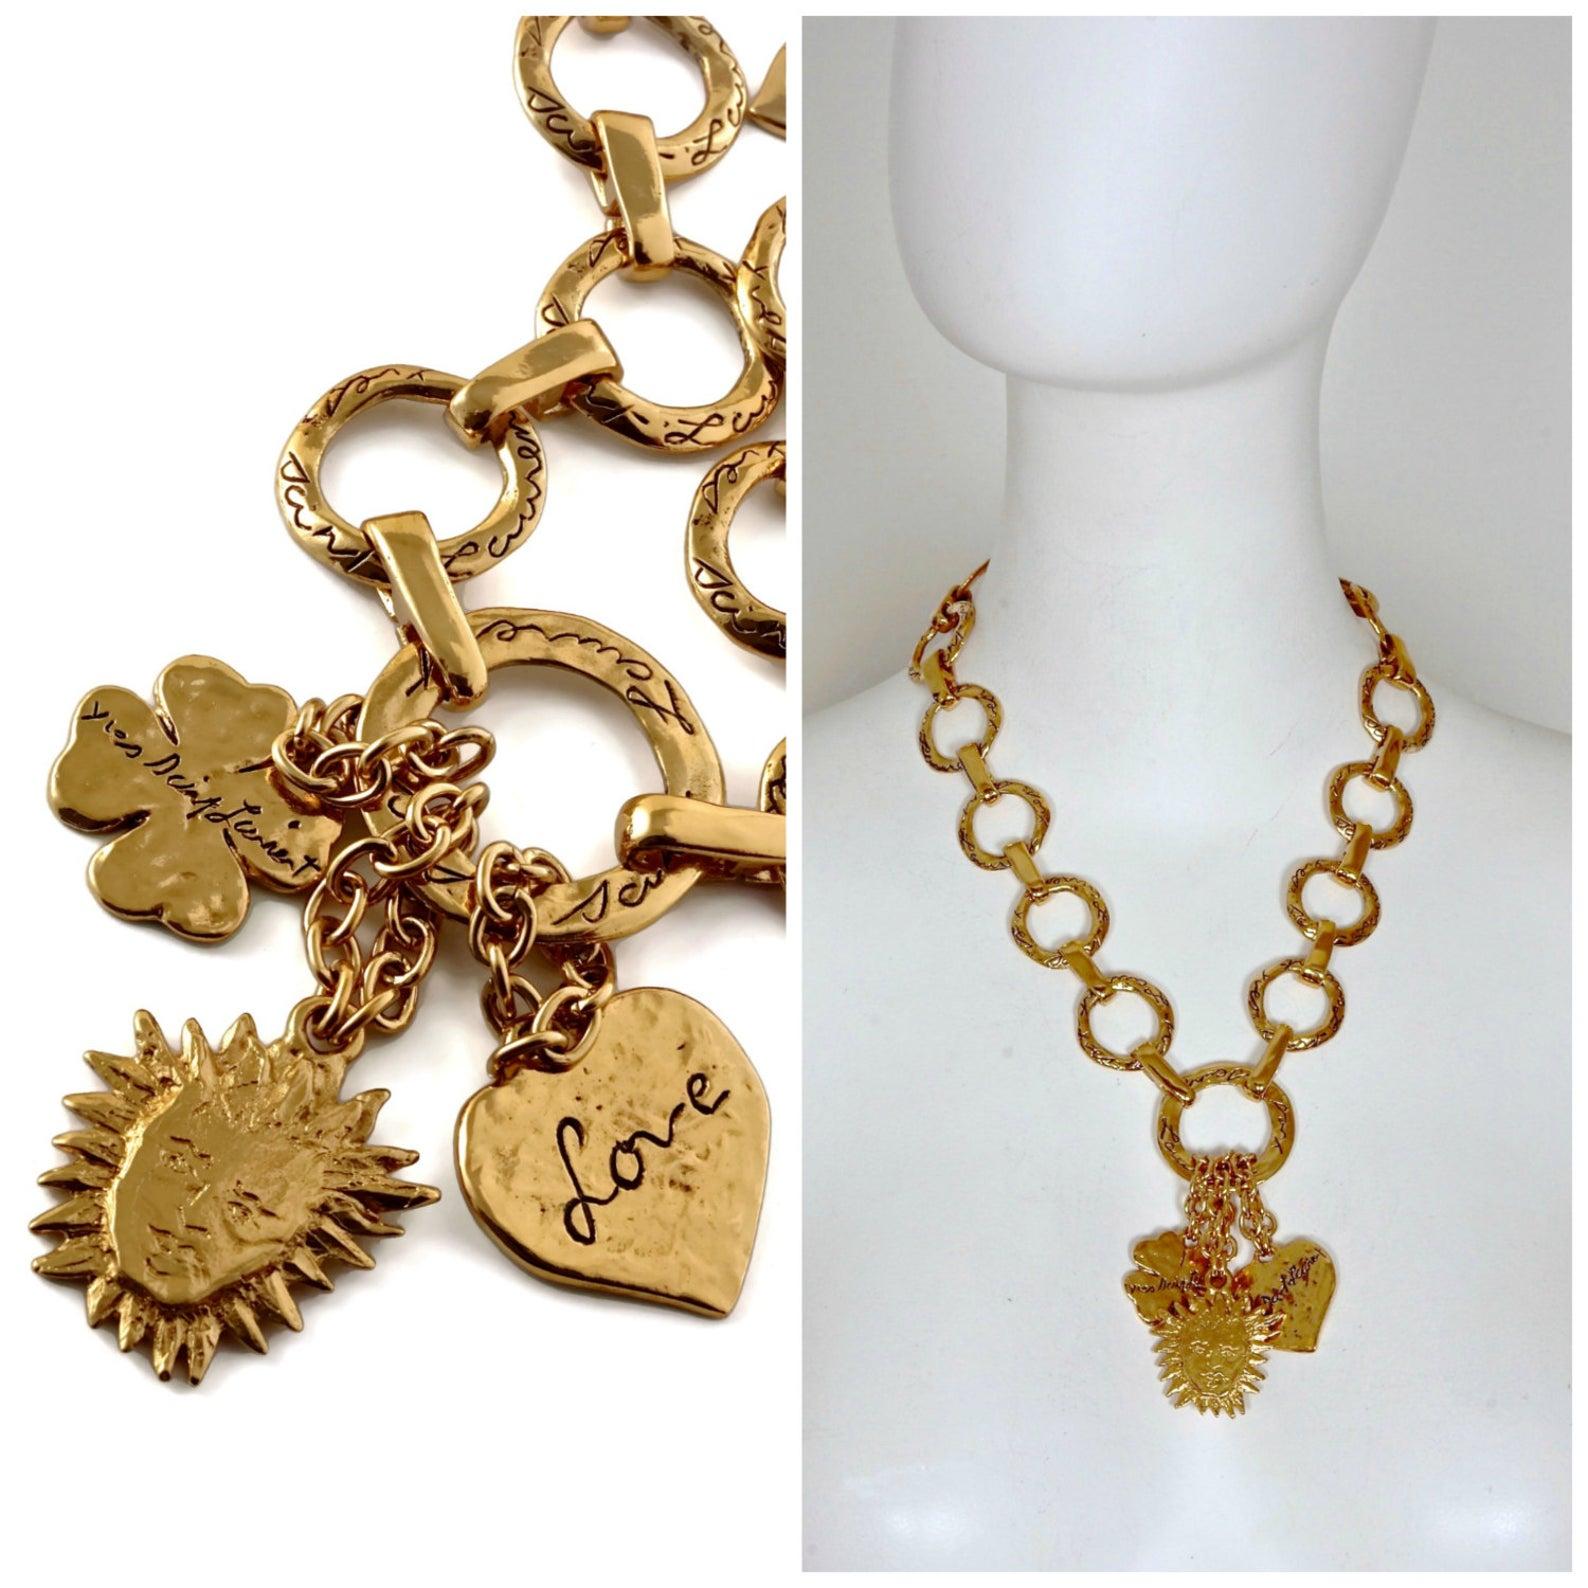 Vintage YSL Yves Saint Laurent Love by Robert Goossens Sun Clover Heart Charm Necklace

Measurements:
Height: 3 5/8 inches (9.20 cm)
Wearable Length: 18 2/8 inches (46.35 cm) to 20 2/8 inches (51.45 cm)

Features:
- 100% Authentic YVES SAINT LAURENT